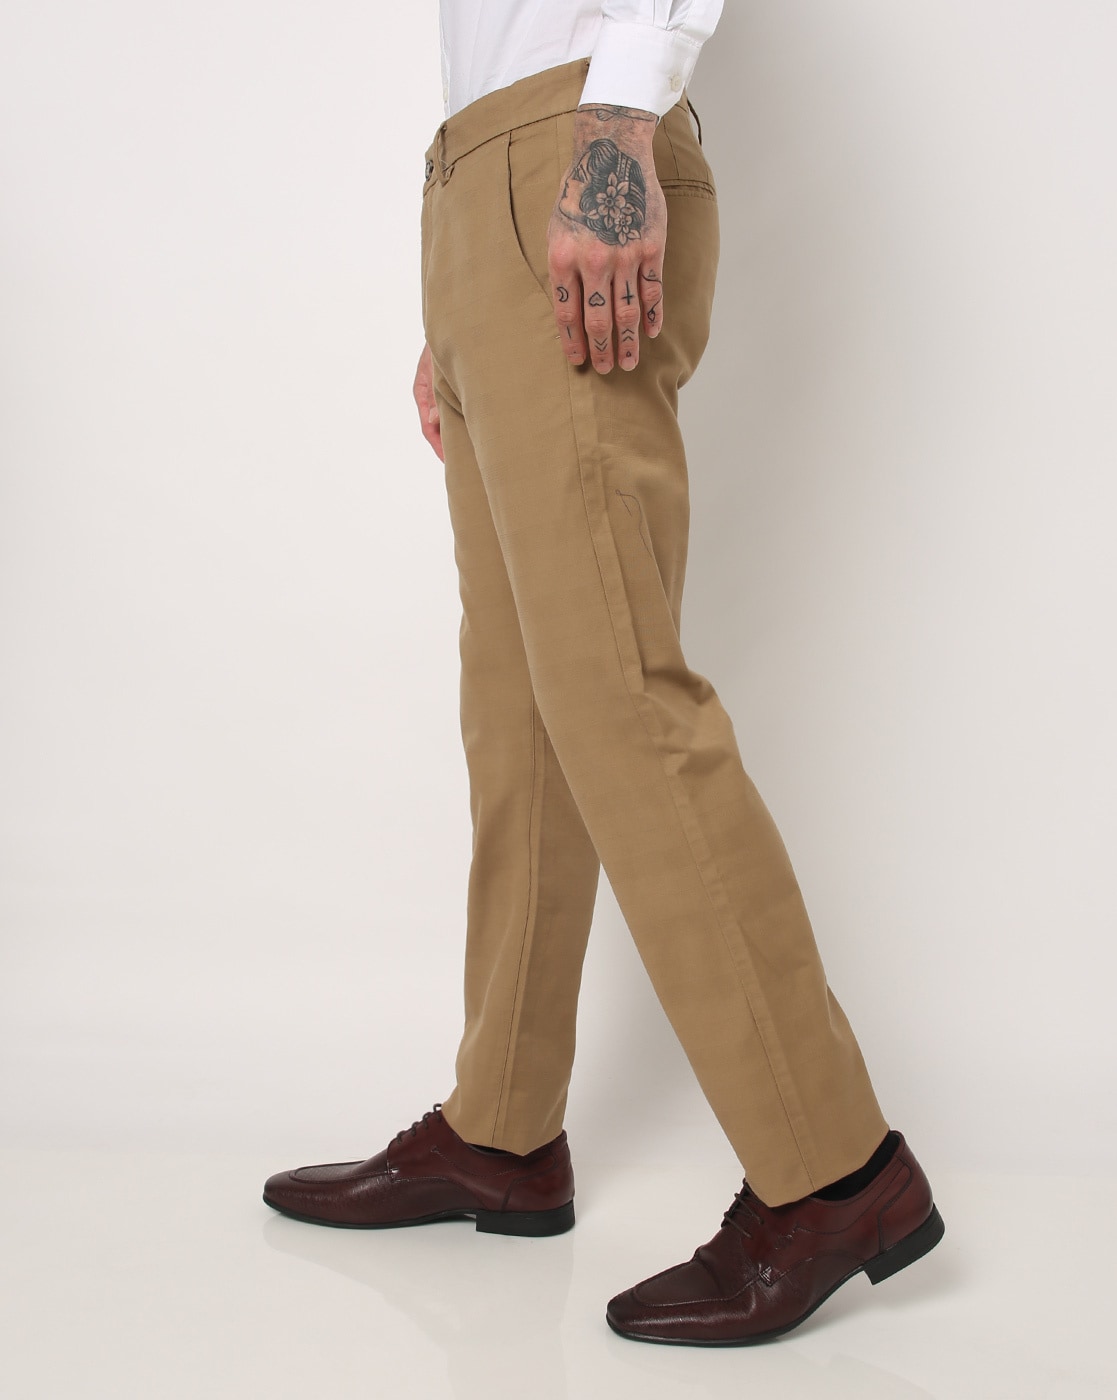 Buy Khaki Trousers  Pants for Women by Outryt Online  Ajiocom